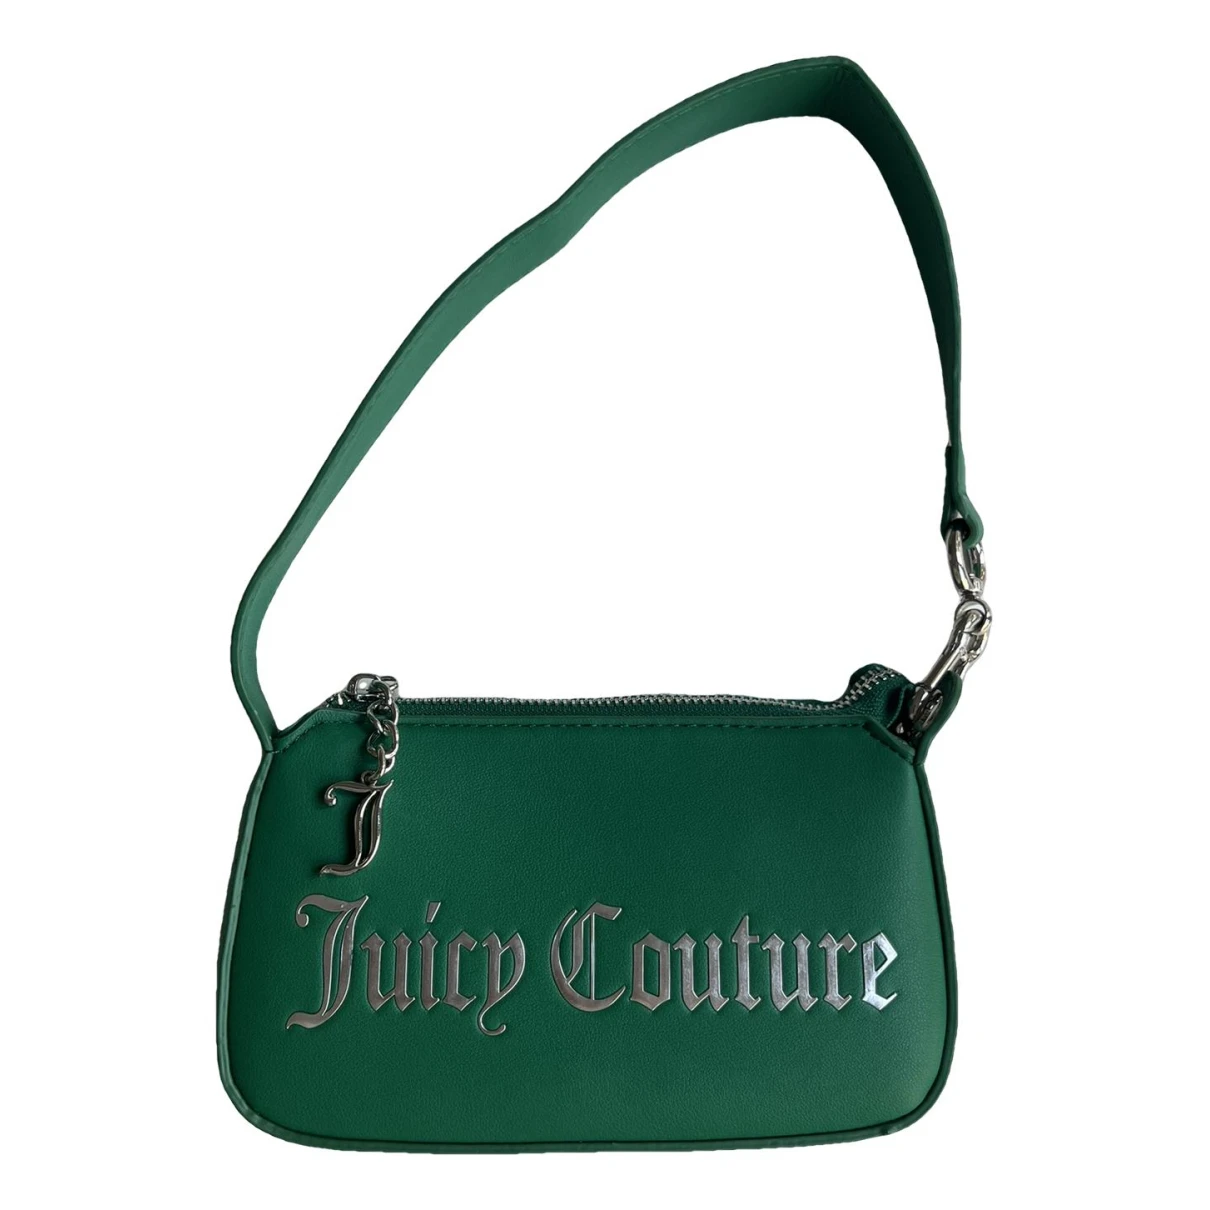 Pre-owned Juicy Couture Handbag In Green